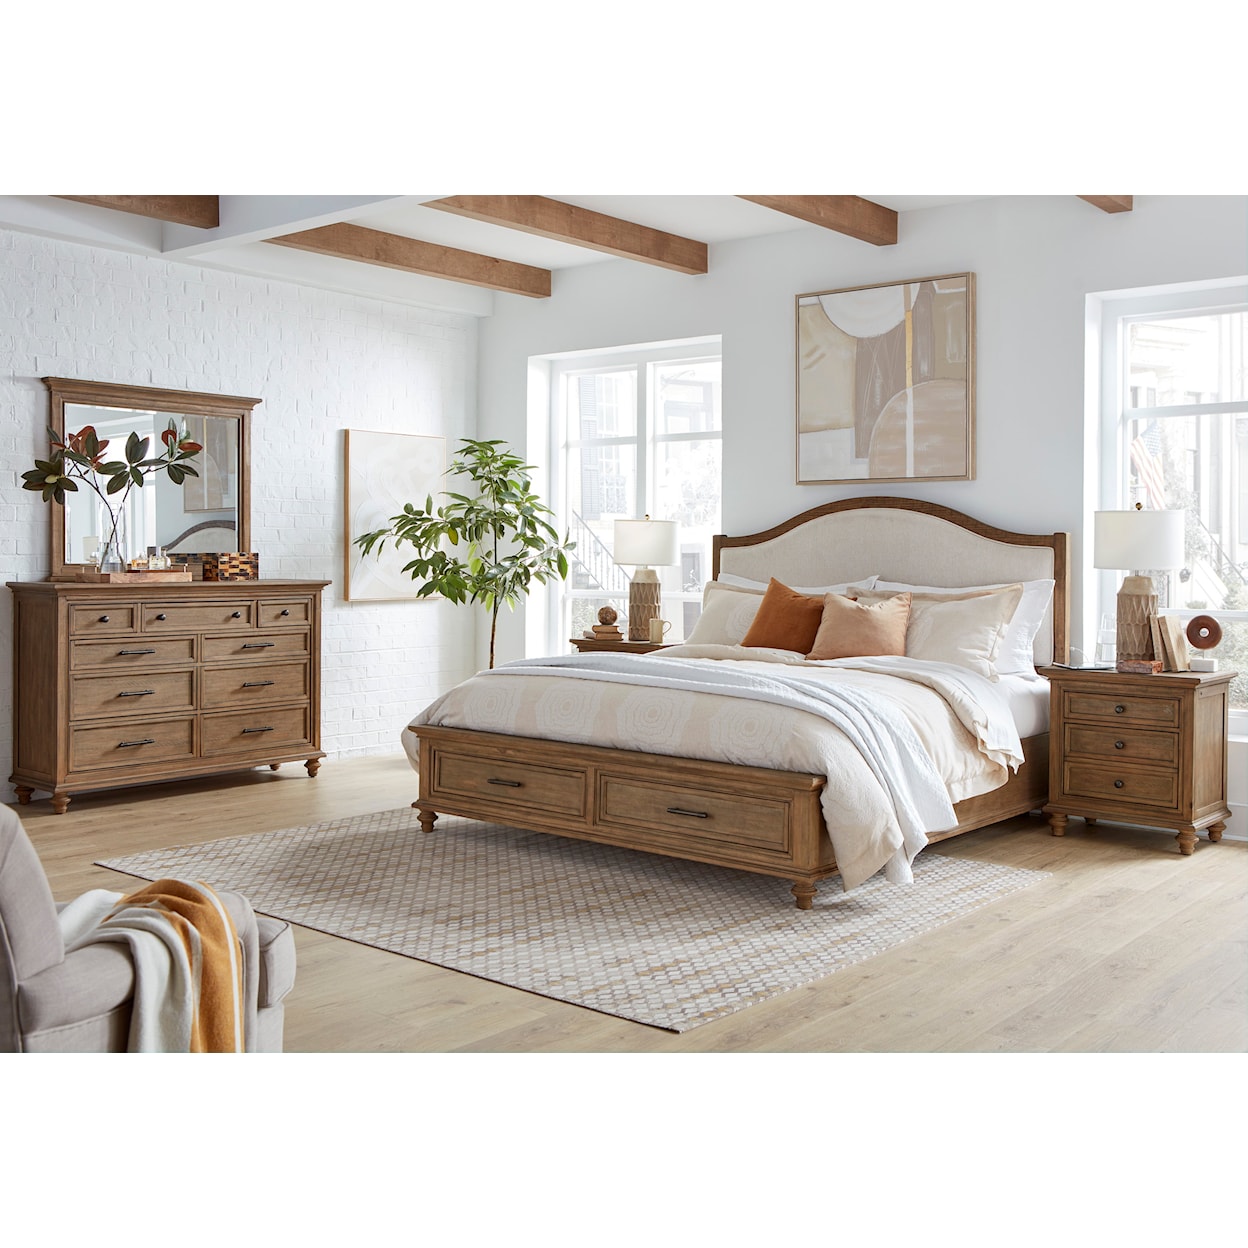 Aspenhome Hensley Queen Arched Panel Bed